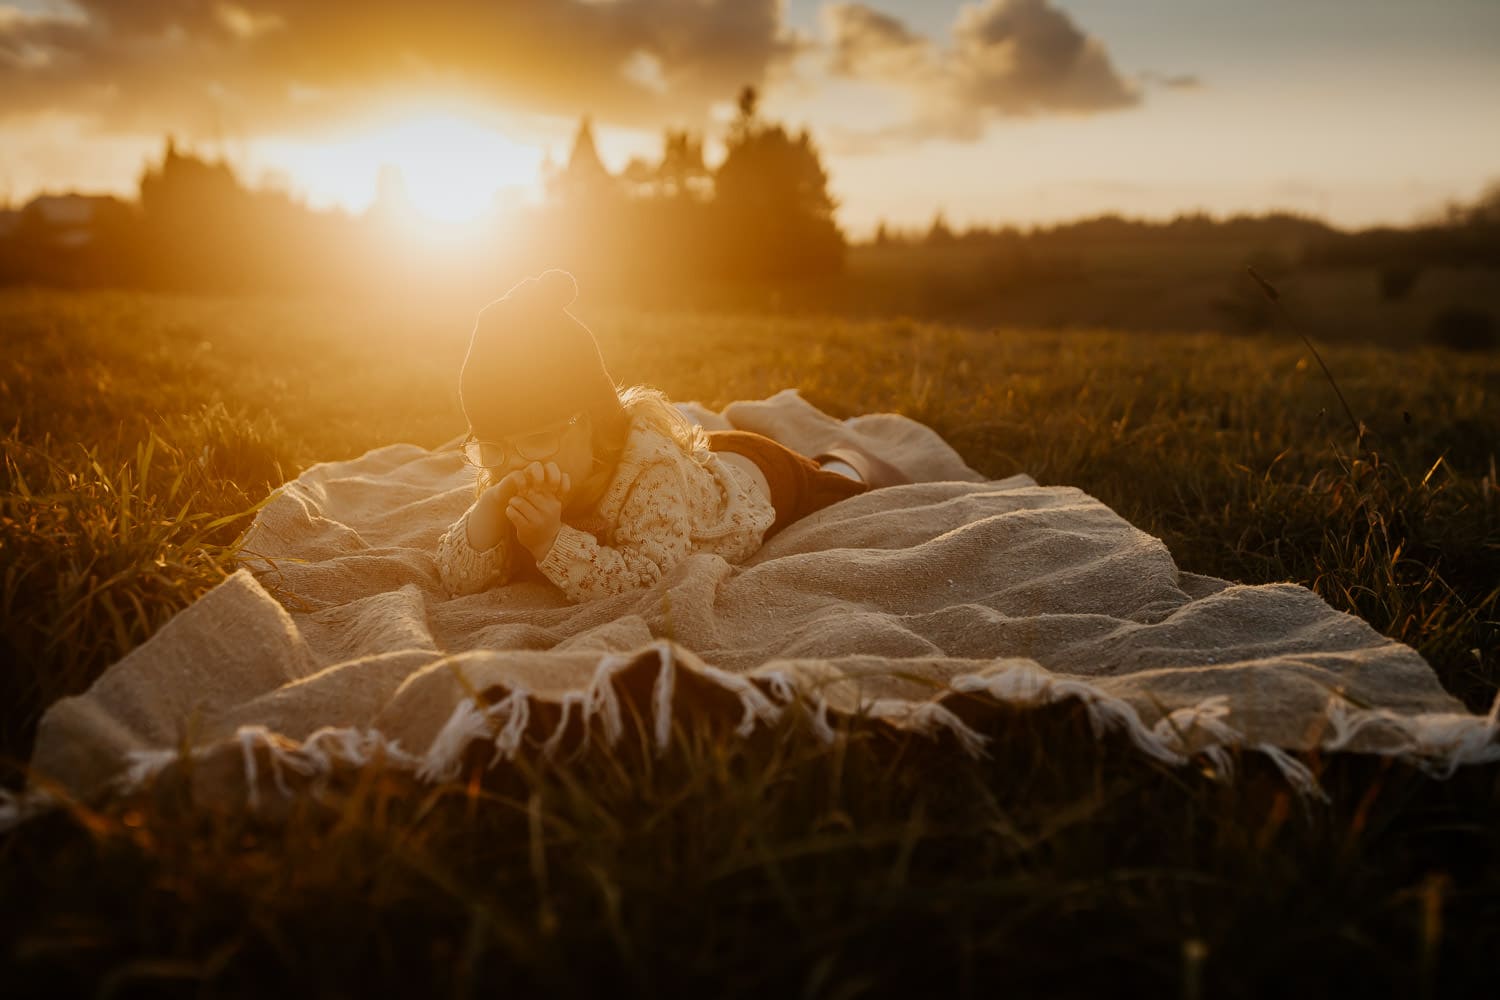 three year old girl laying on blanket with hazy sun behind her - creative photography ideas with the cinebloom camera lens filter